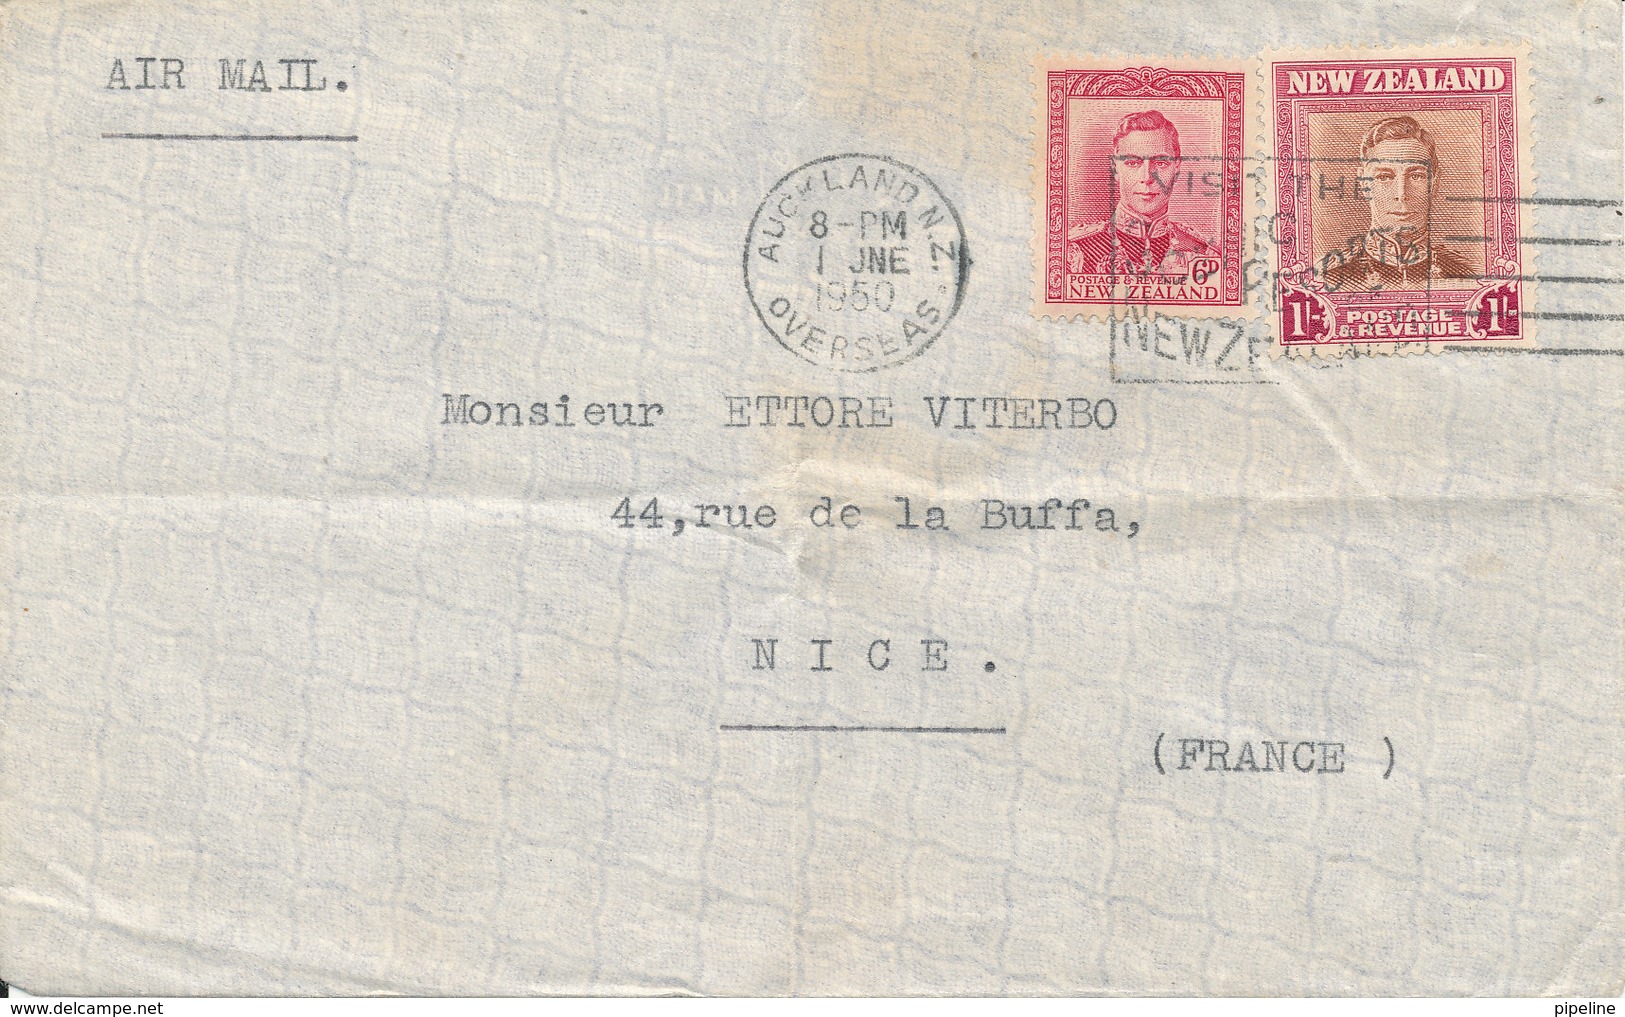 New Zealand Air Mail Cover Sent To France Auckland 1-6-1950 (the Cover Is Bended) - Corréo Aéreo